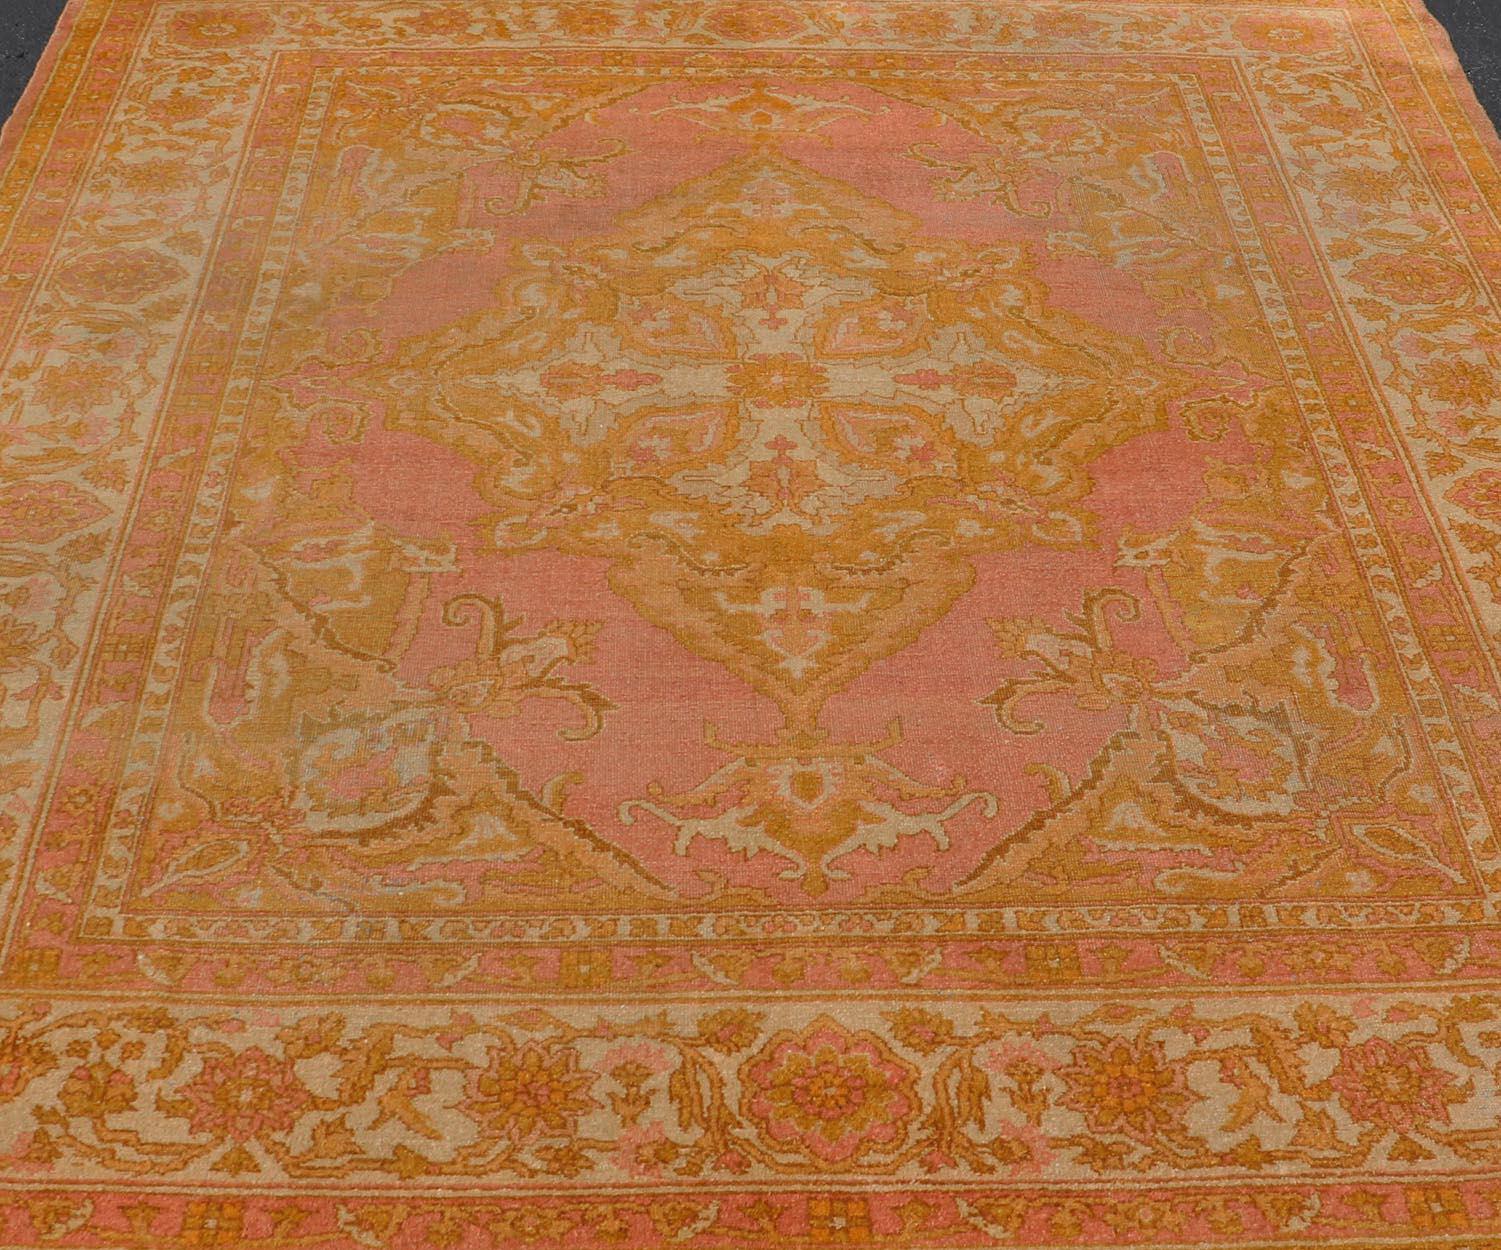 Antique Indian Amritsar Rug in Acidic Yellow, Pink and Ivory With Medallion. Keivan Woven Arts rug / X23-0303-362 /  1920 circa / Antique Amritsar, Antique Agra.
Measures: 8'1 x 9'10 
The pink, yellow, and ivory hues of this antique Indian Amritsar